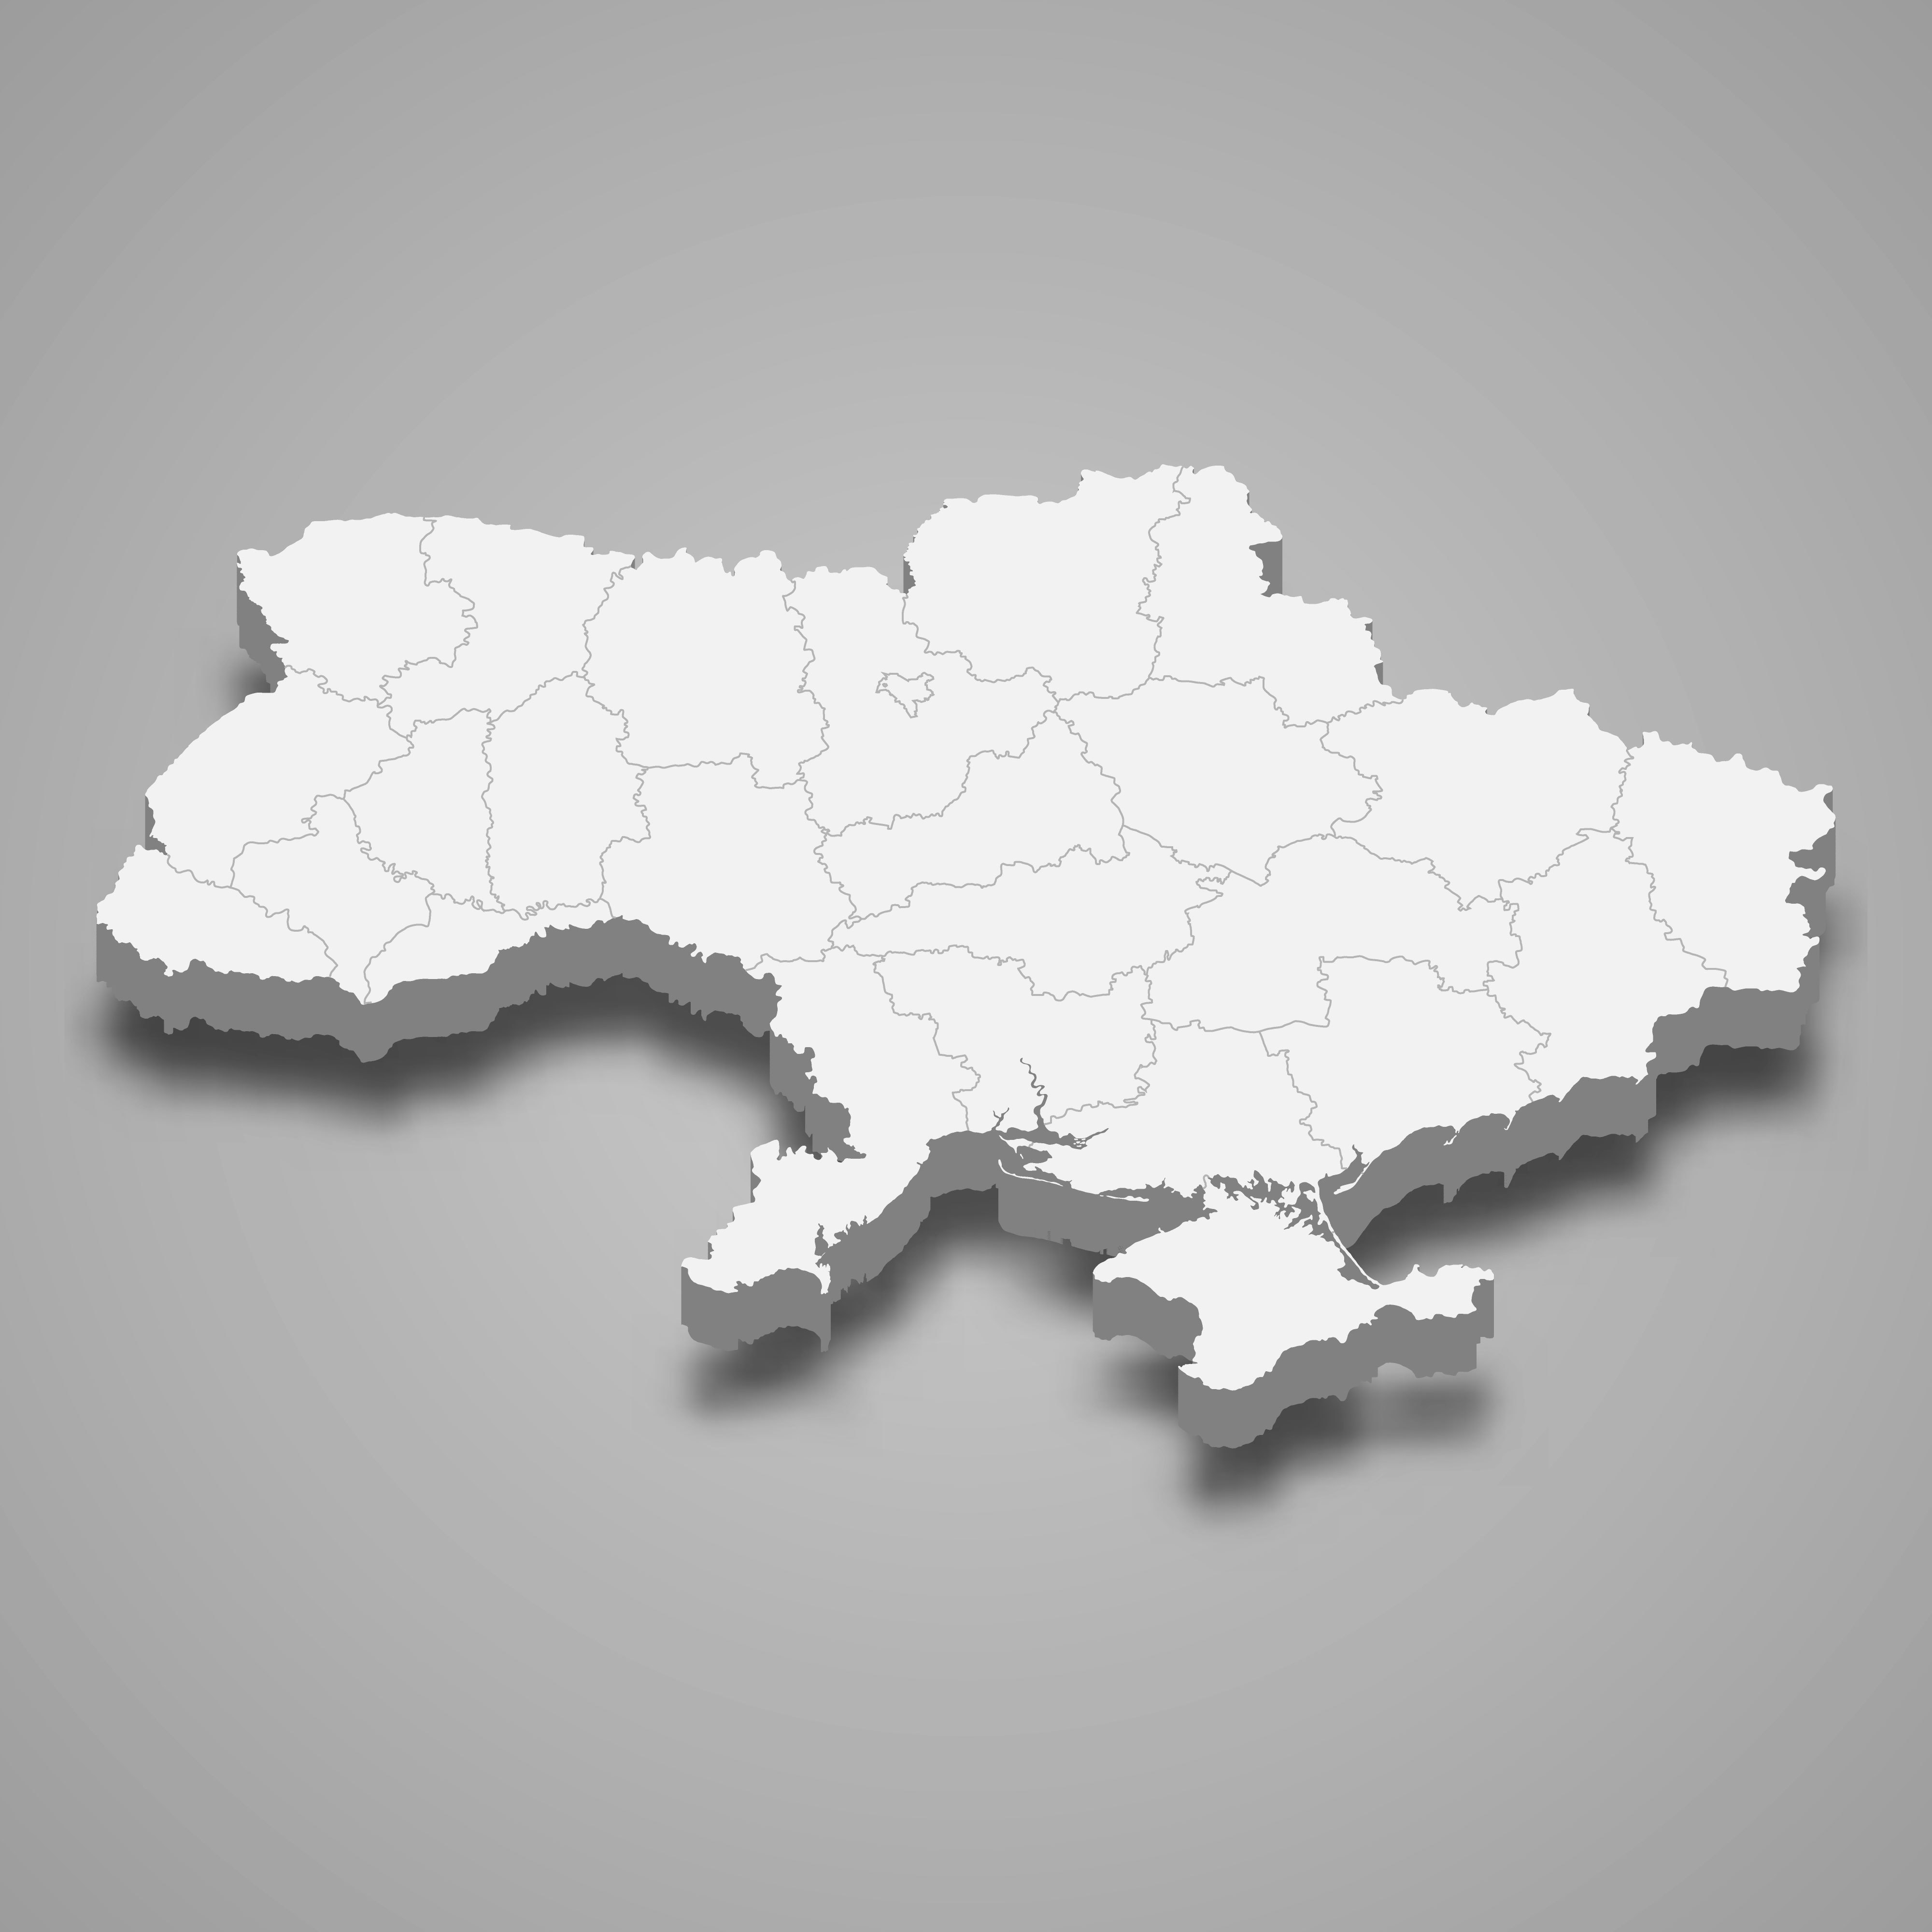 3d map of Ukraine with borders of regions. 3d map with borders Template for your design